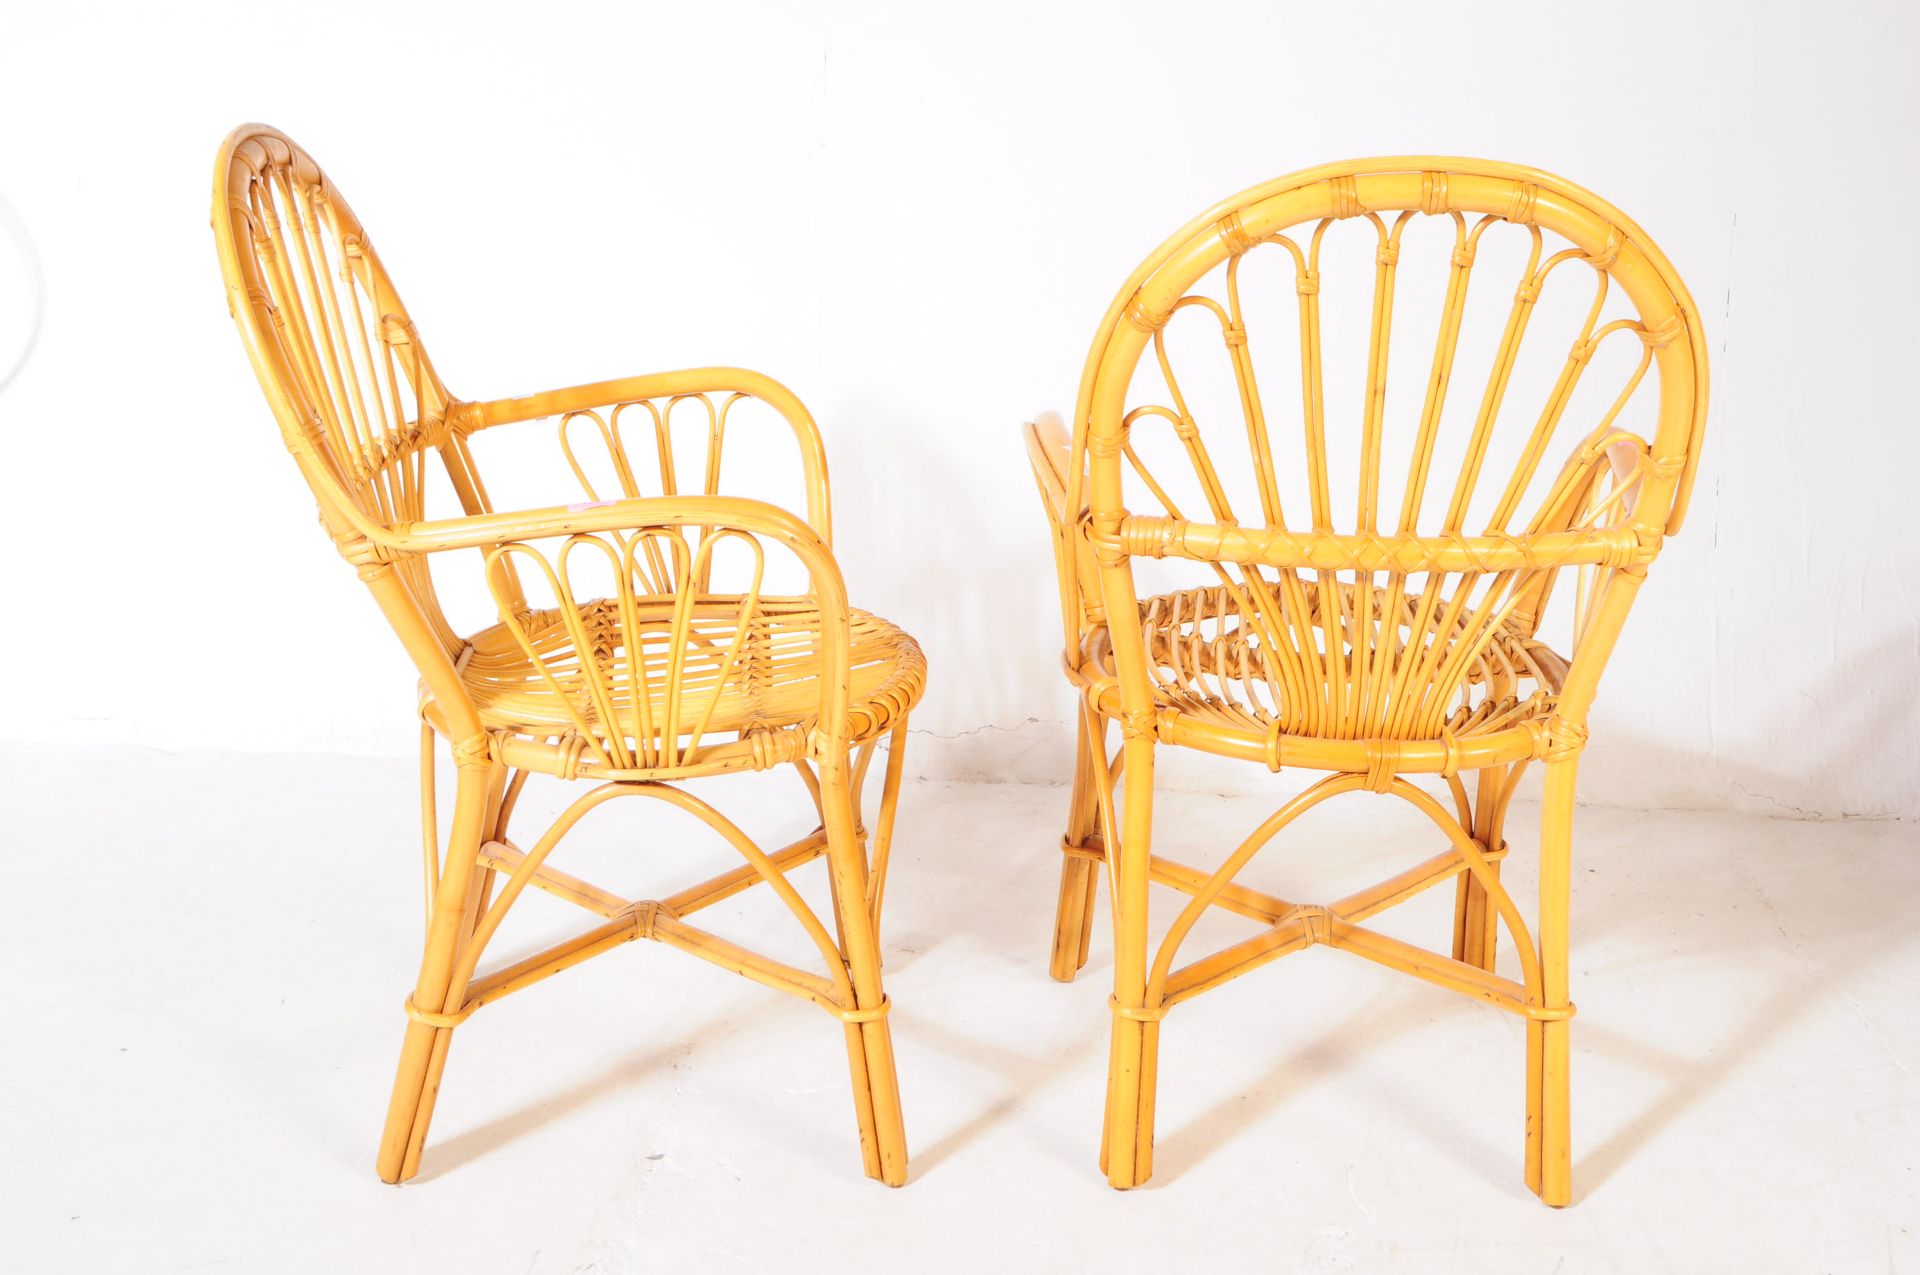 TWO VINTAGE 20TH CENTURY BAMBOO & CANE ARMCHAIRS - Image 4 of 6